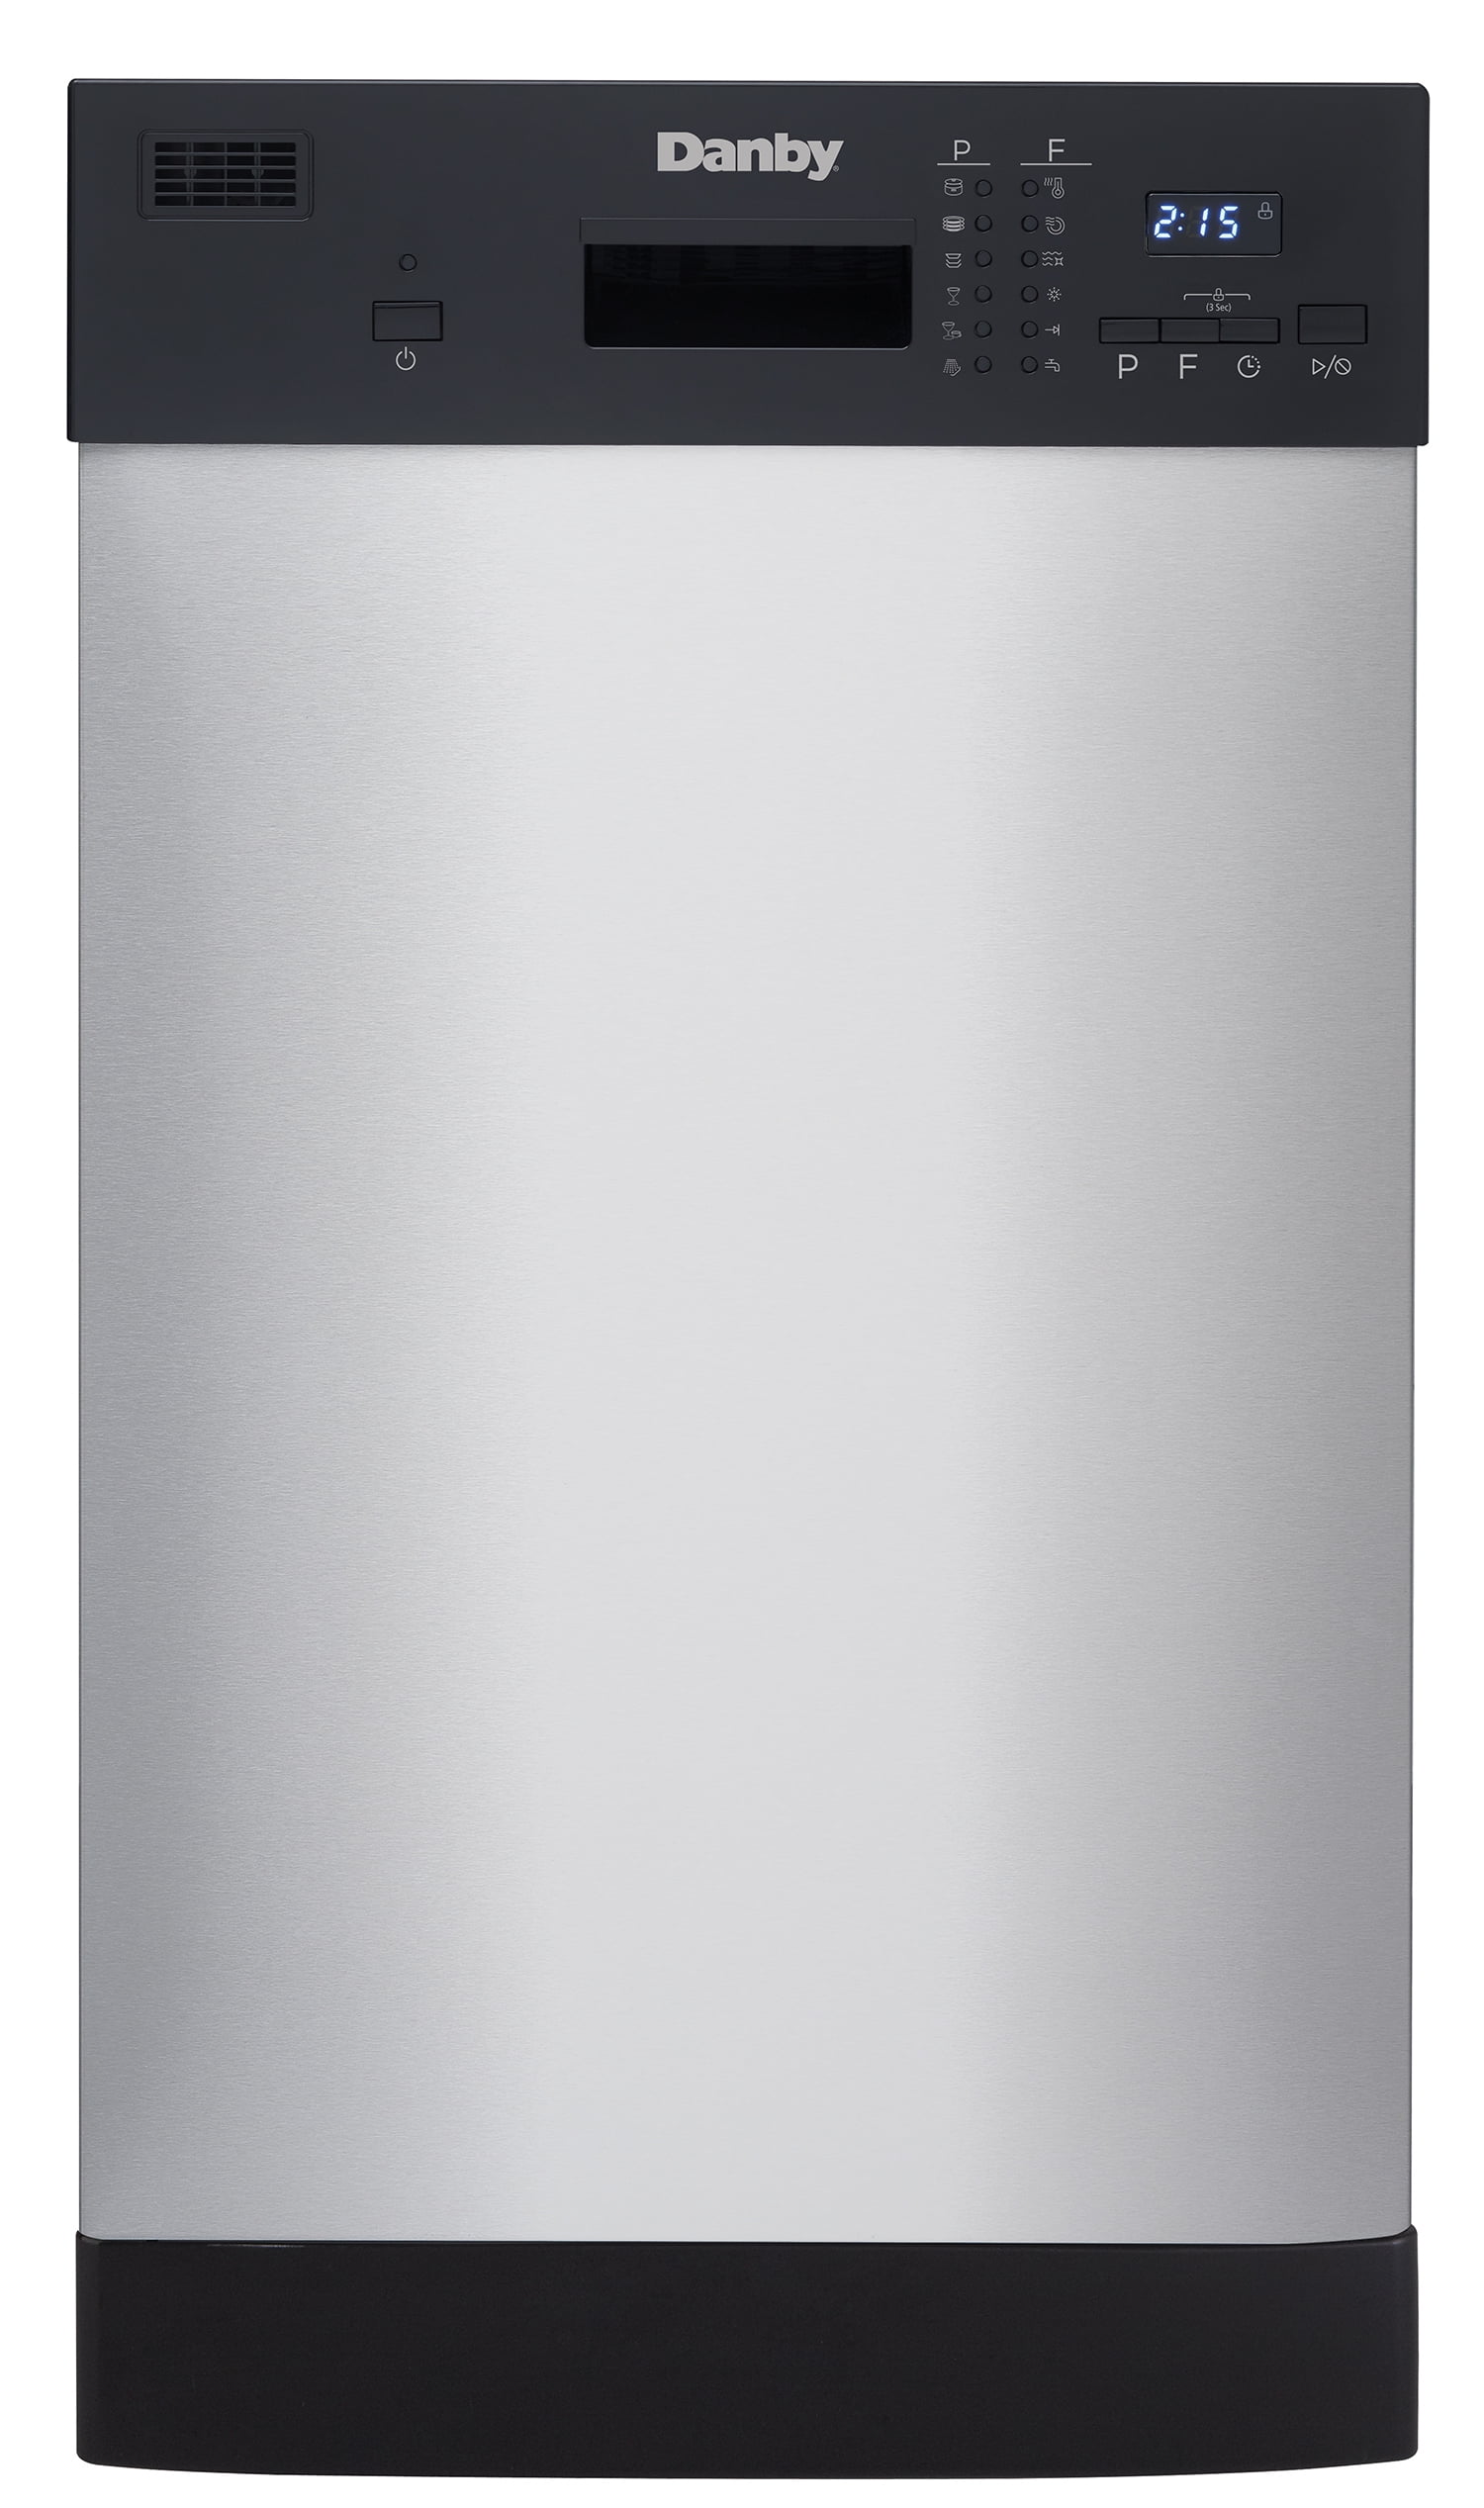 best price on stainless steel dishwashers